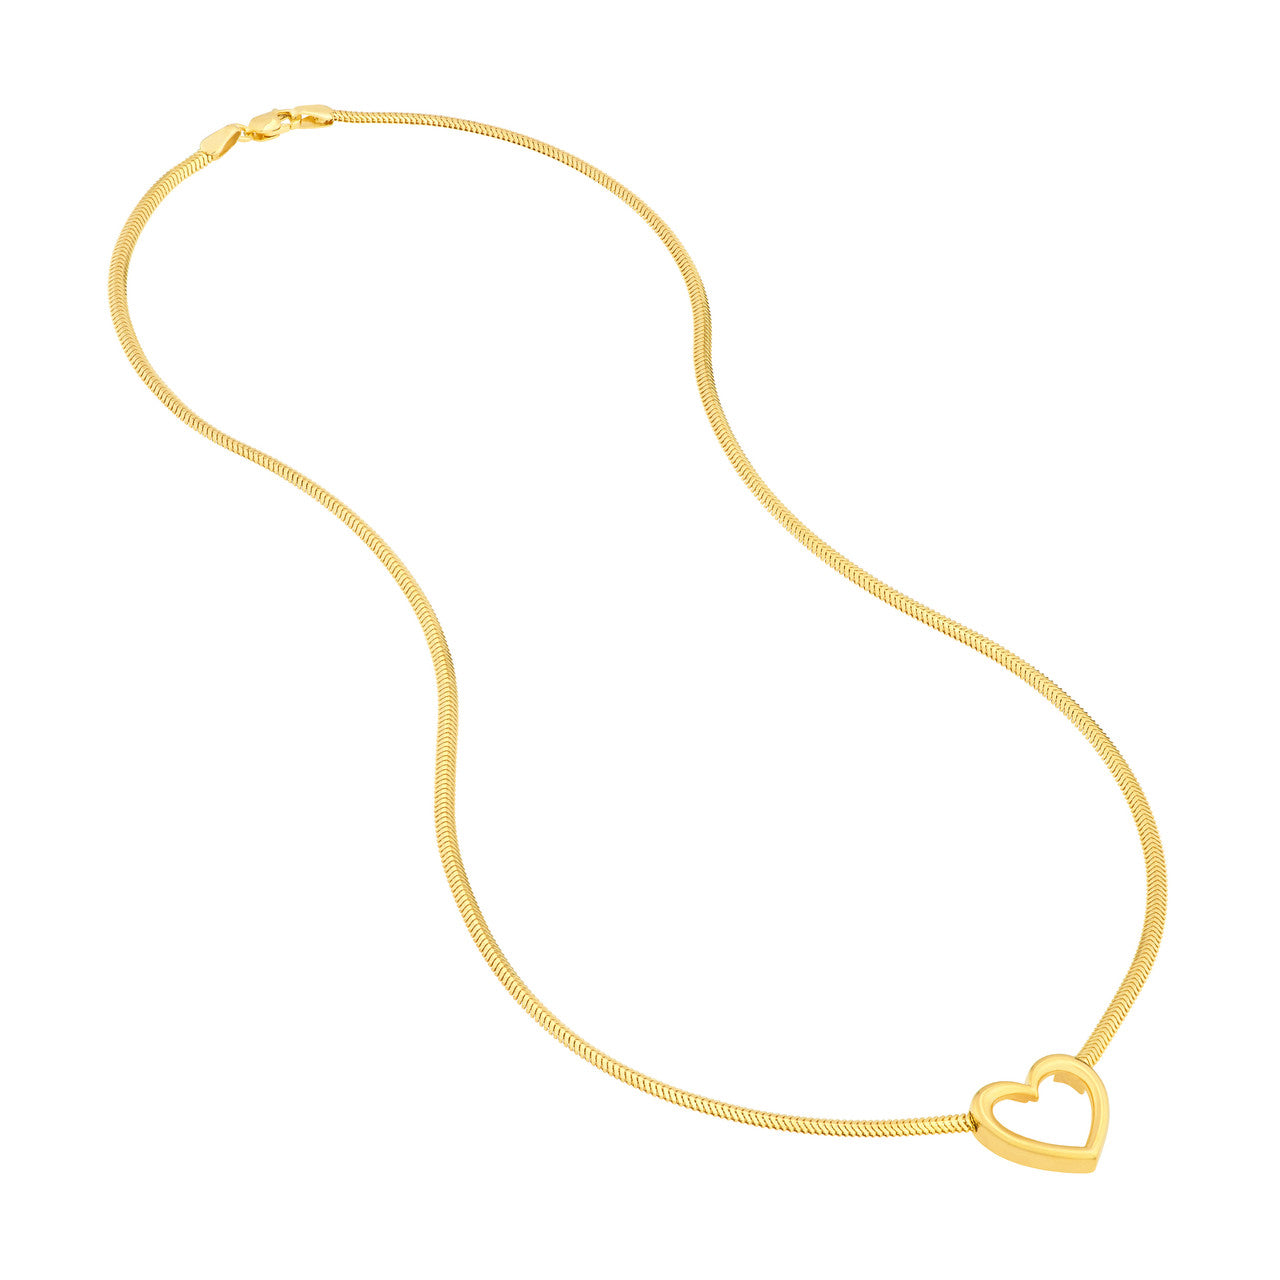 14K Solid Gold - Love Heart Necklace